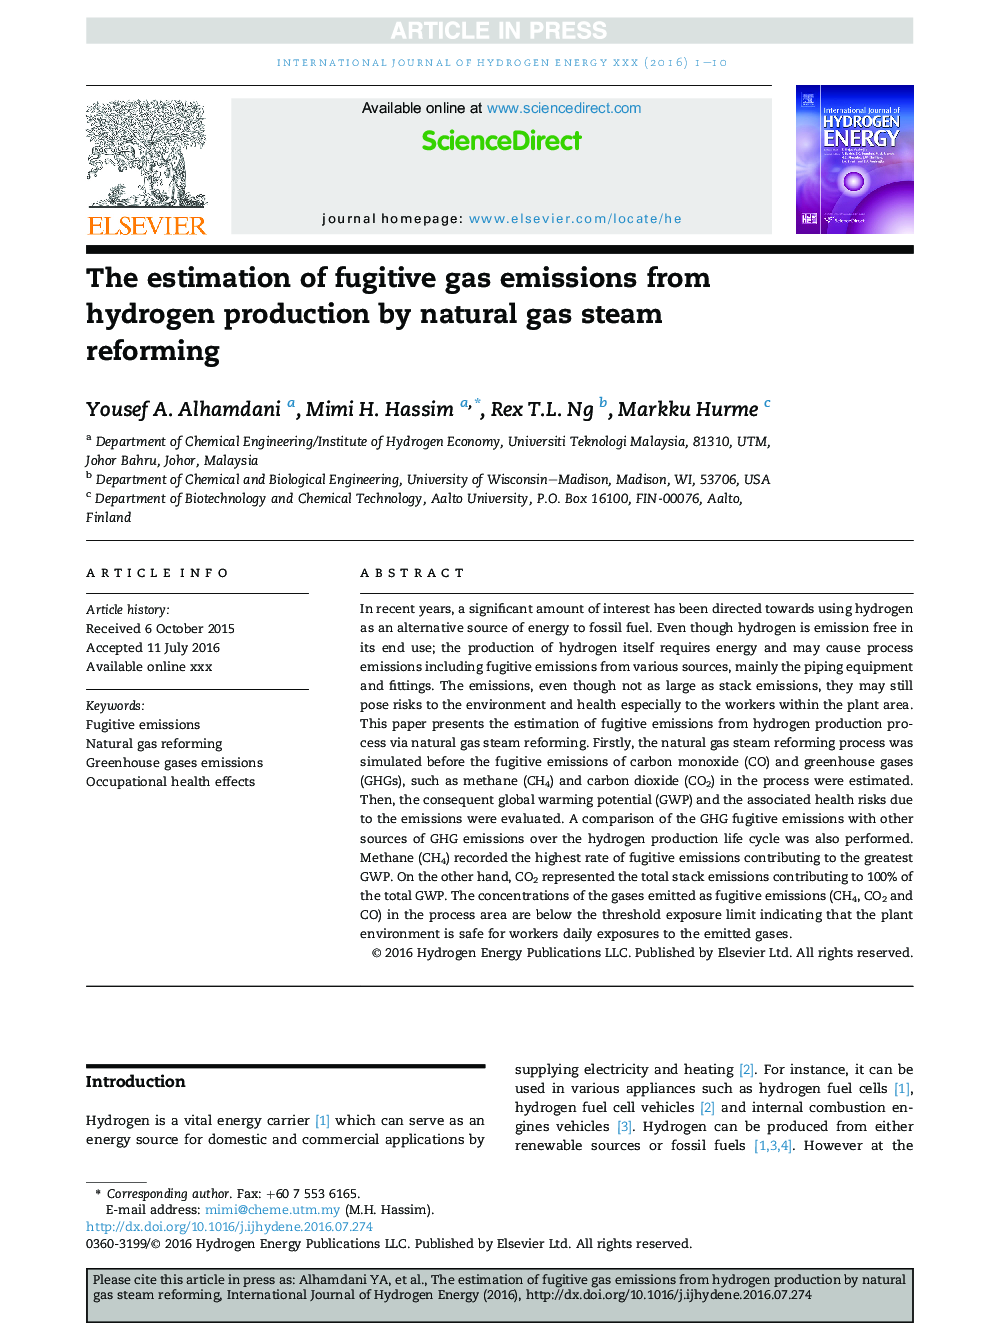 The estimation of fugitive gas emissions from hydrogen production by natural gas steam reforming